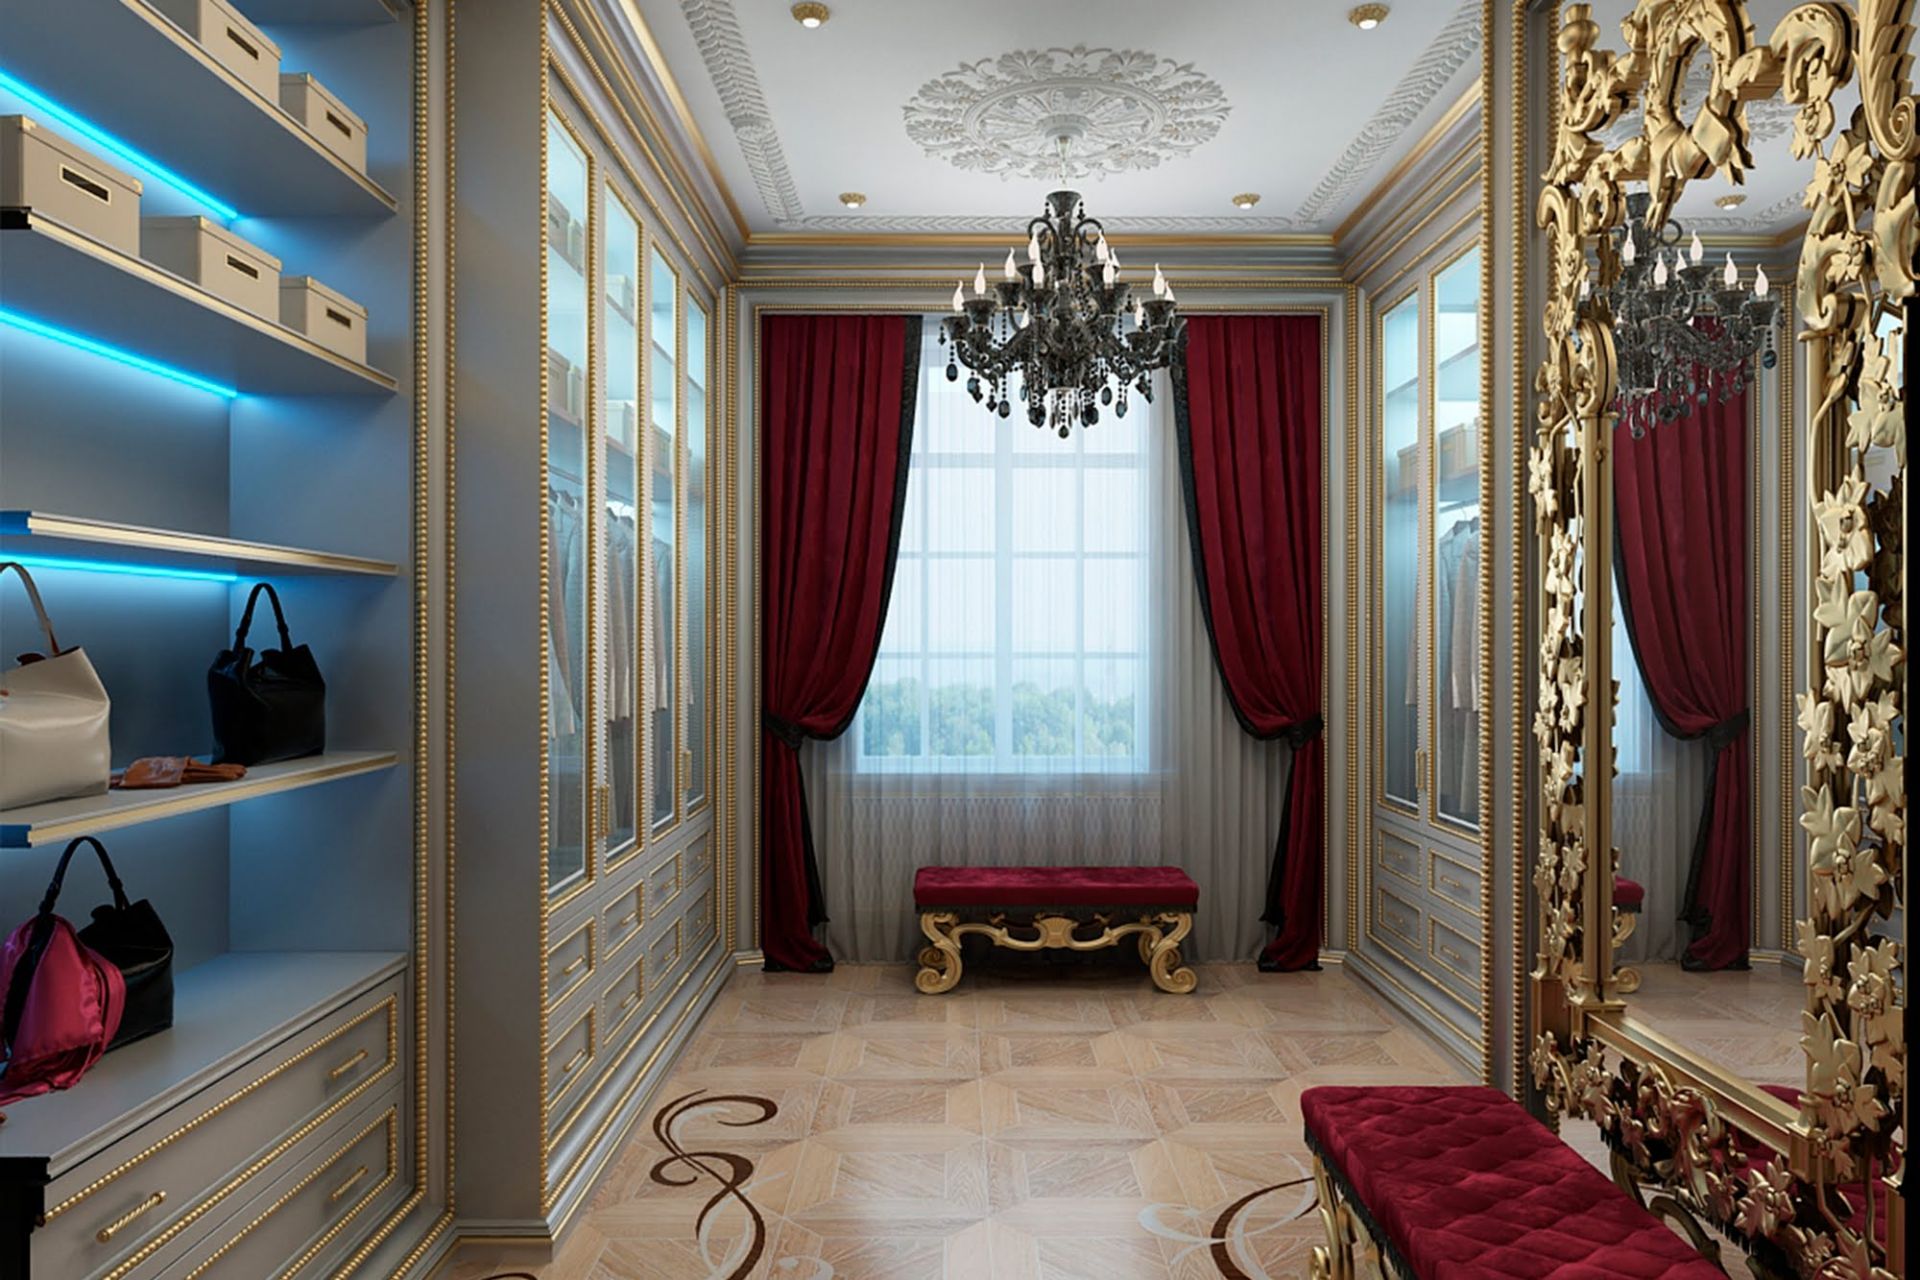 Wood, Dressing room interior with the Empire style elements